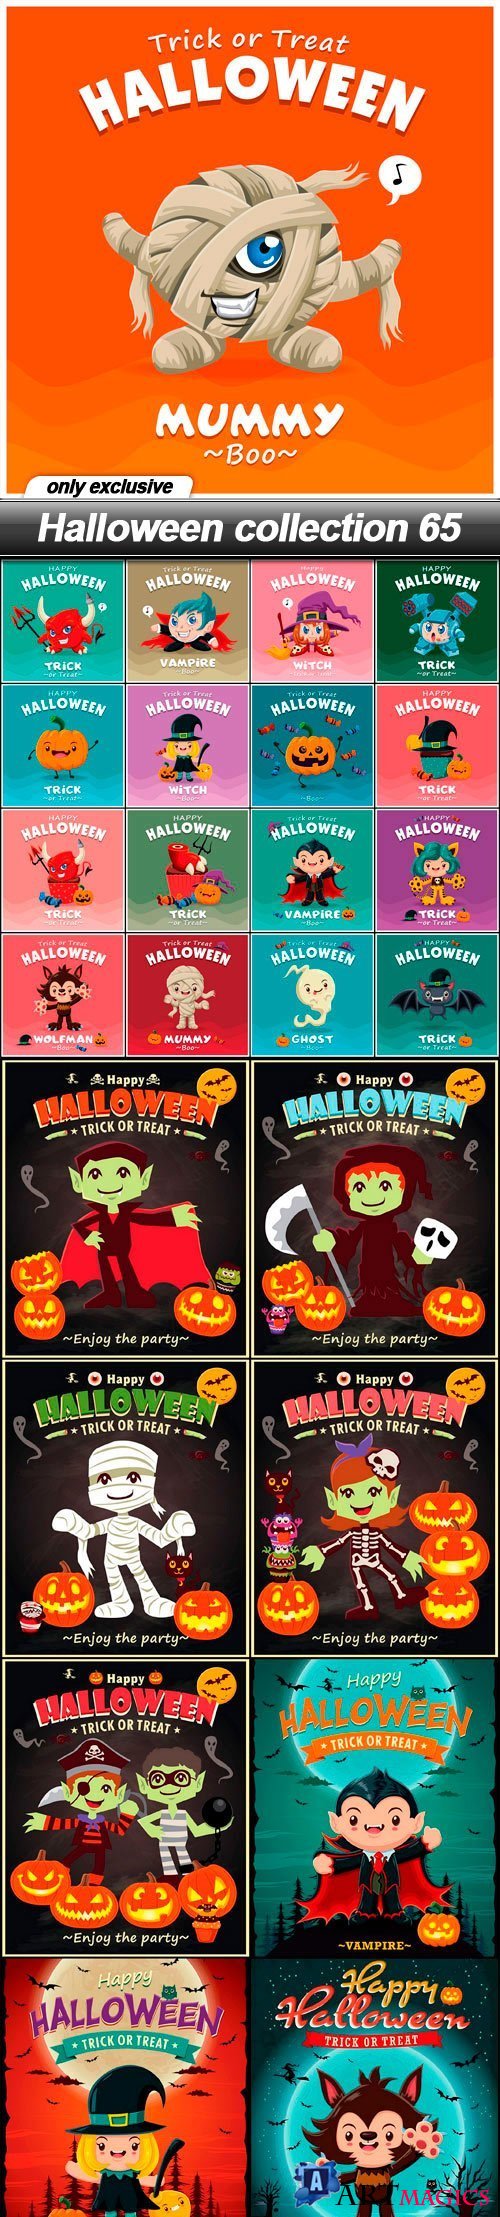 Halloween collection 65 - 25 EPS